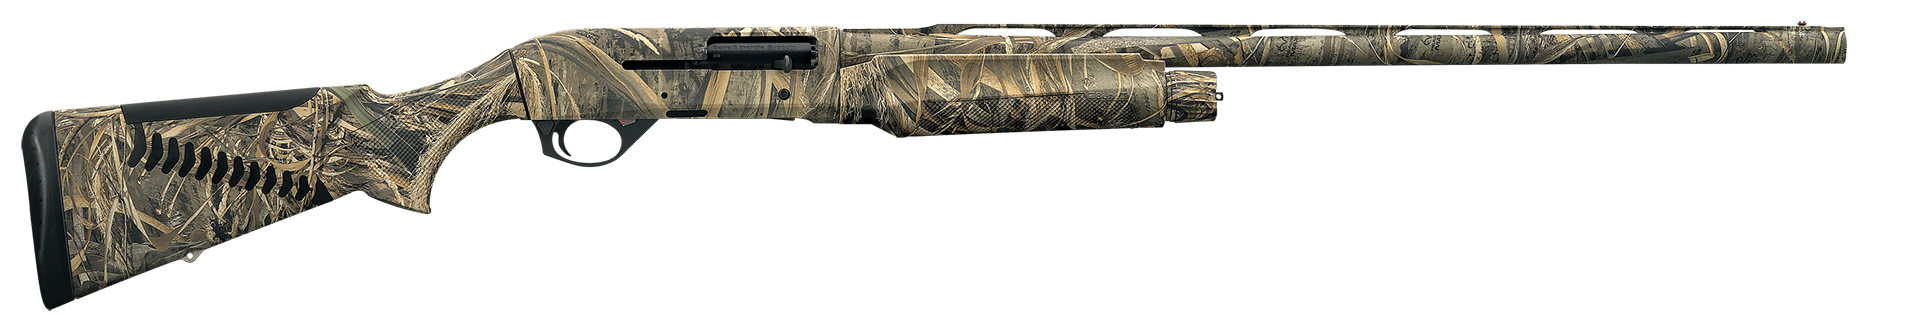 benelli-m2-comfortech-camo-max-5.png